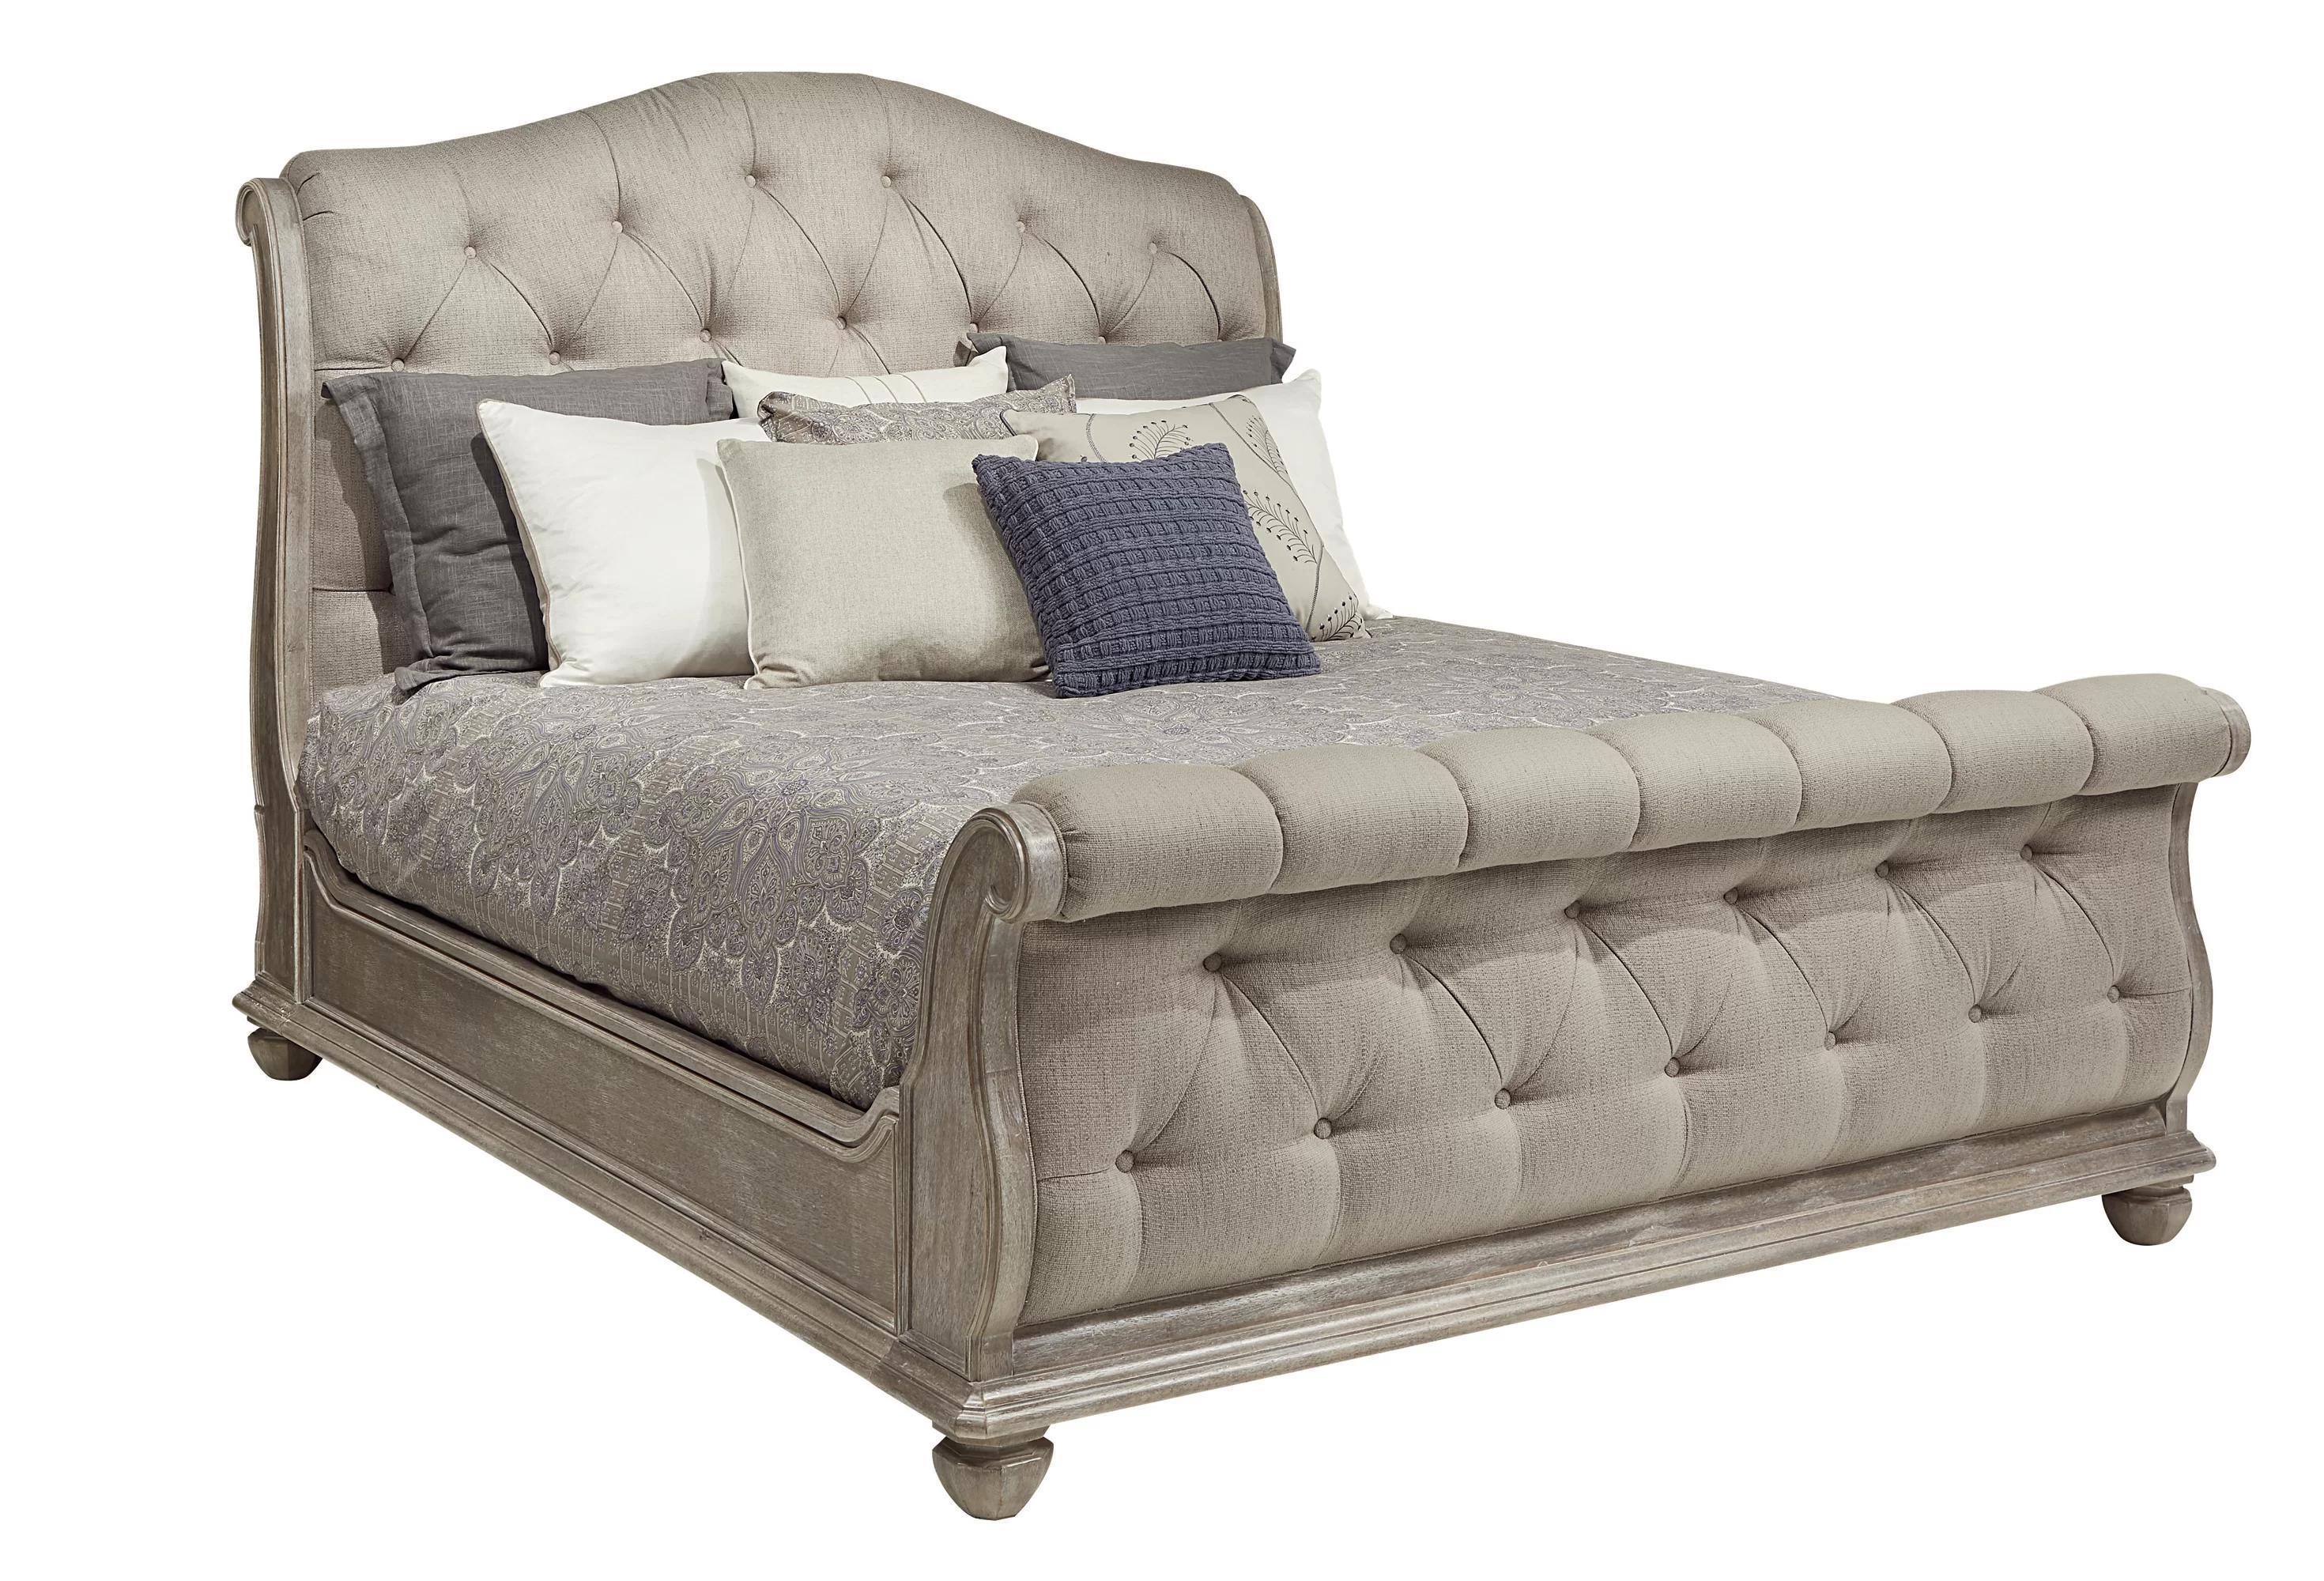 Classic, Traditional Sleigh Bed Summer Creek 251126-1303 in Wash Oak, Beige Fabric